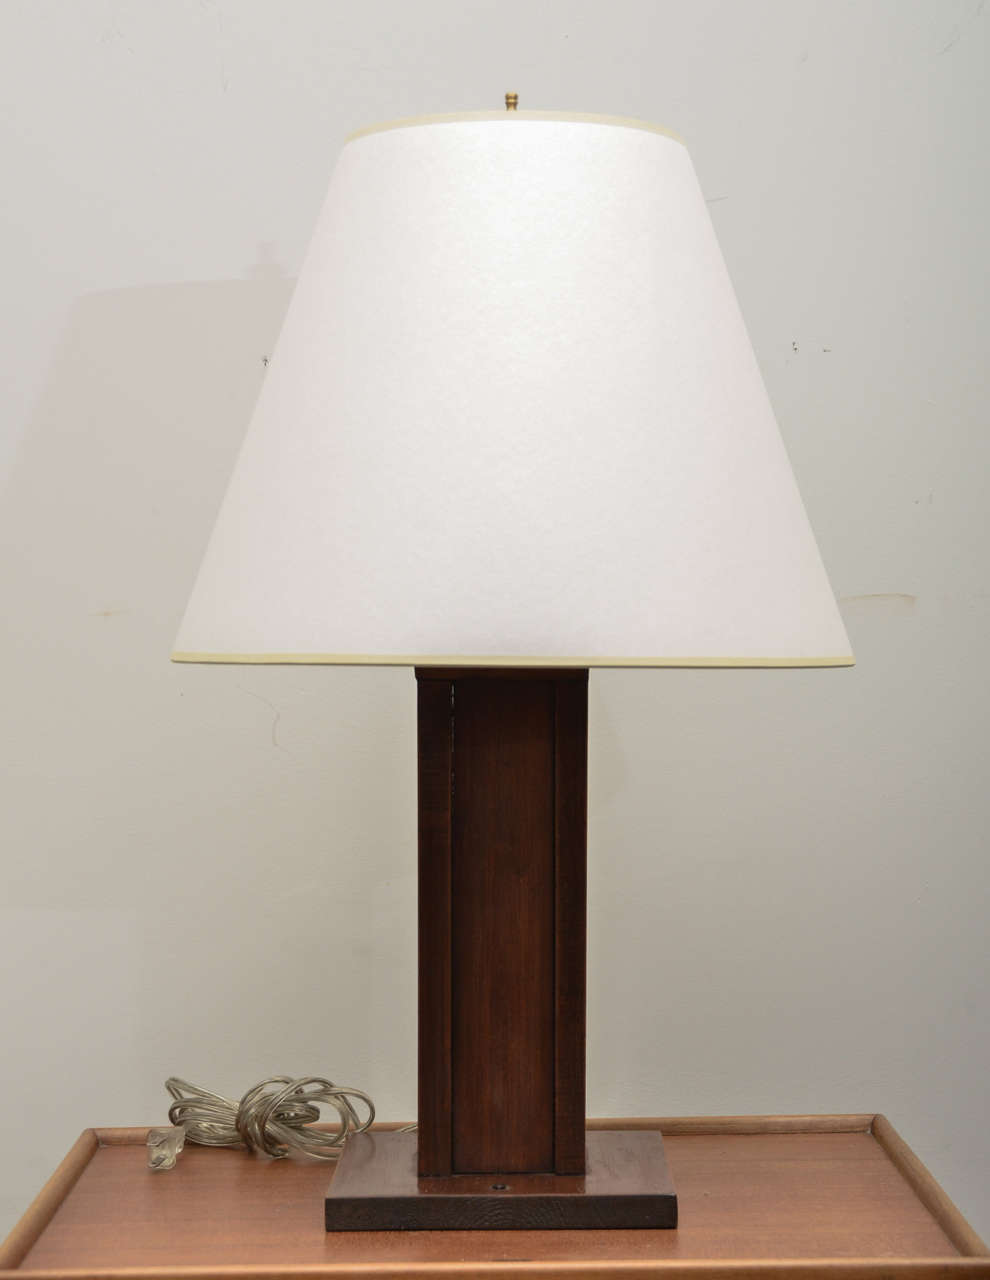 Wooden Table Lamp with Square Wooden Base - Mission Style, wired for US. Shade is Not Included.